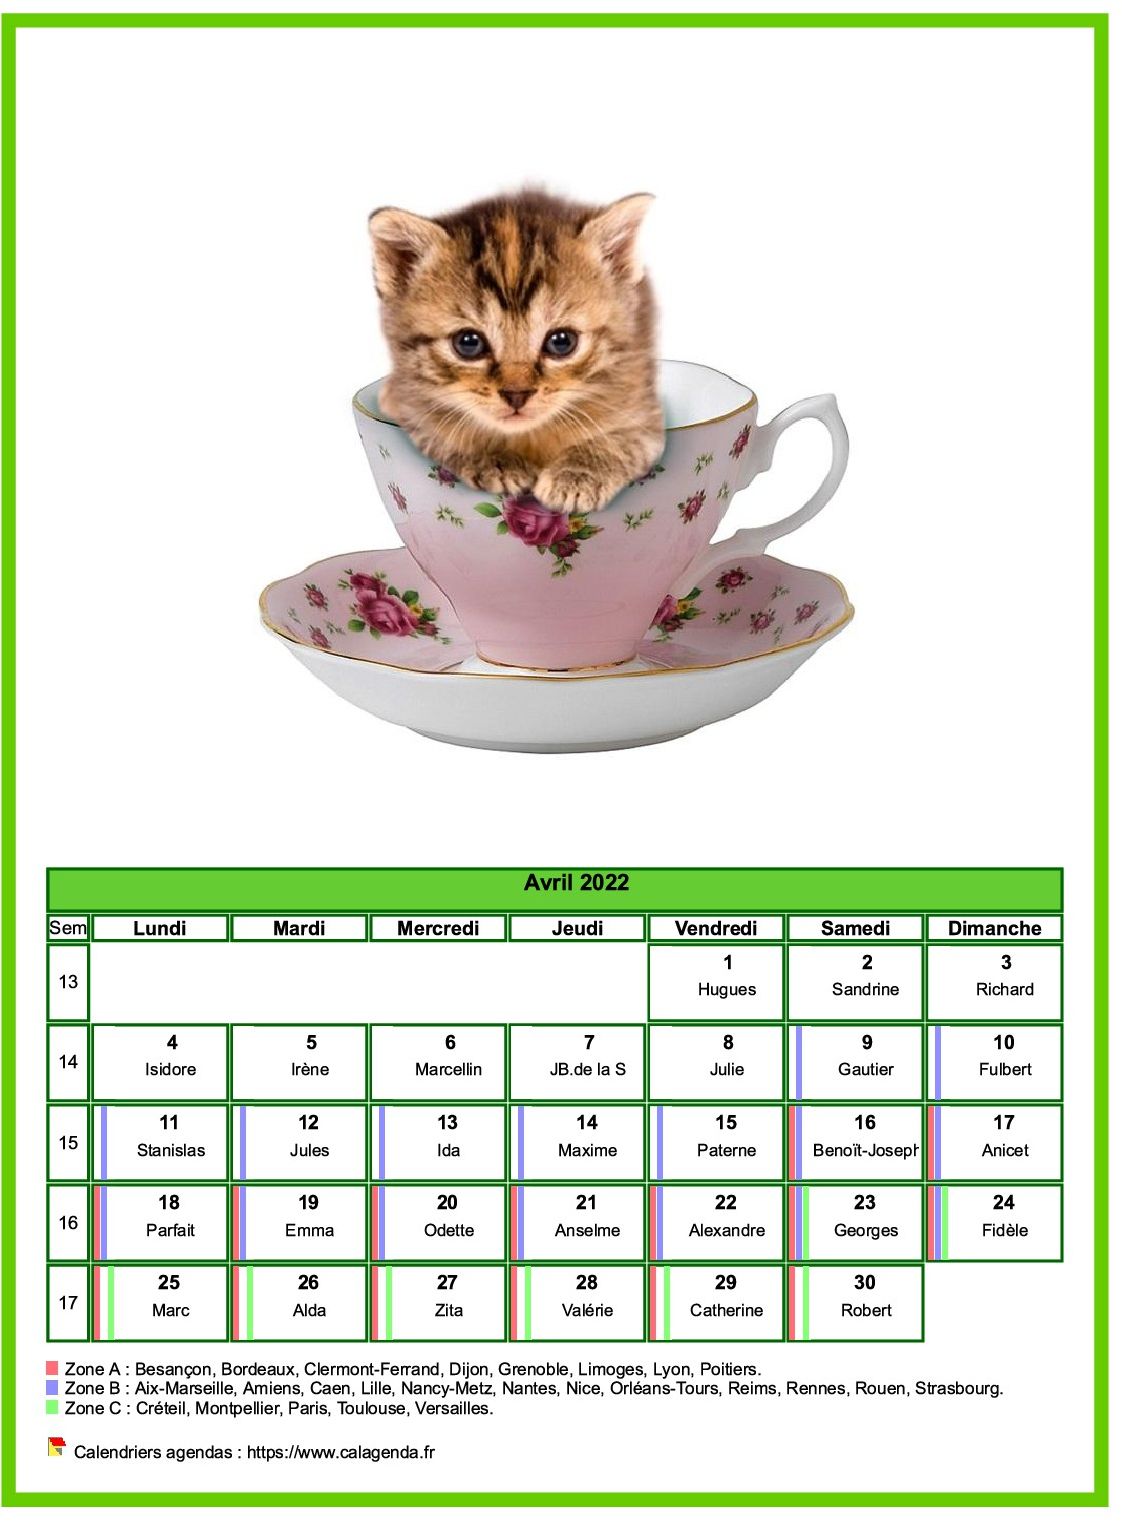 Calendrier avril 2022 chats